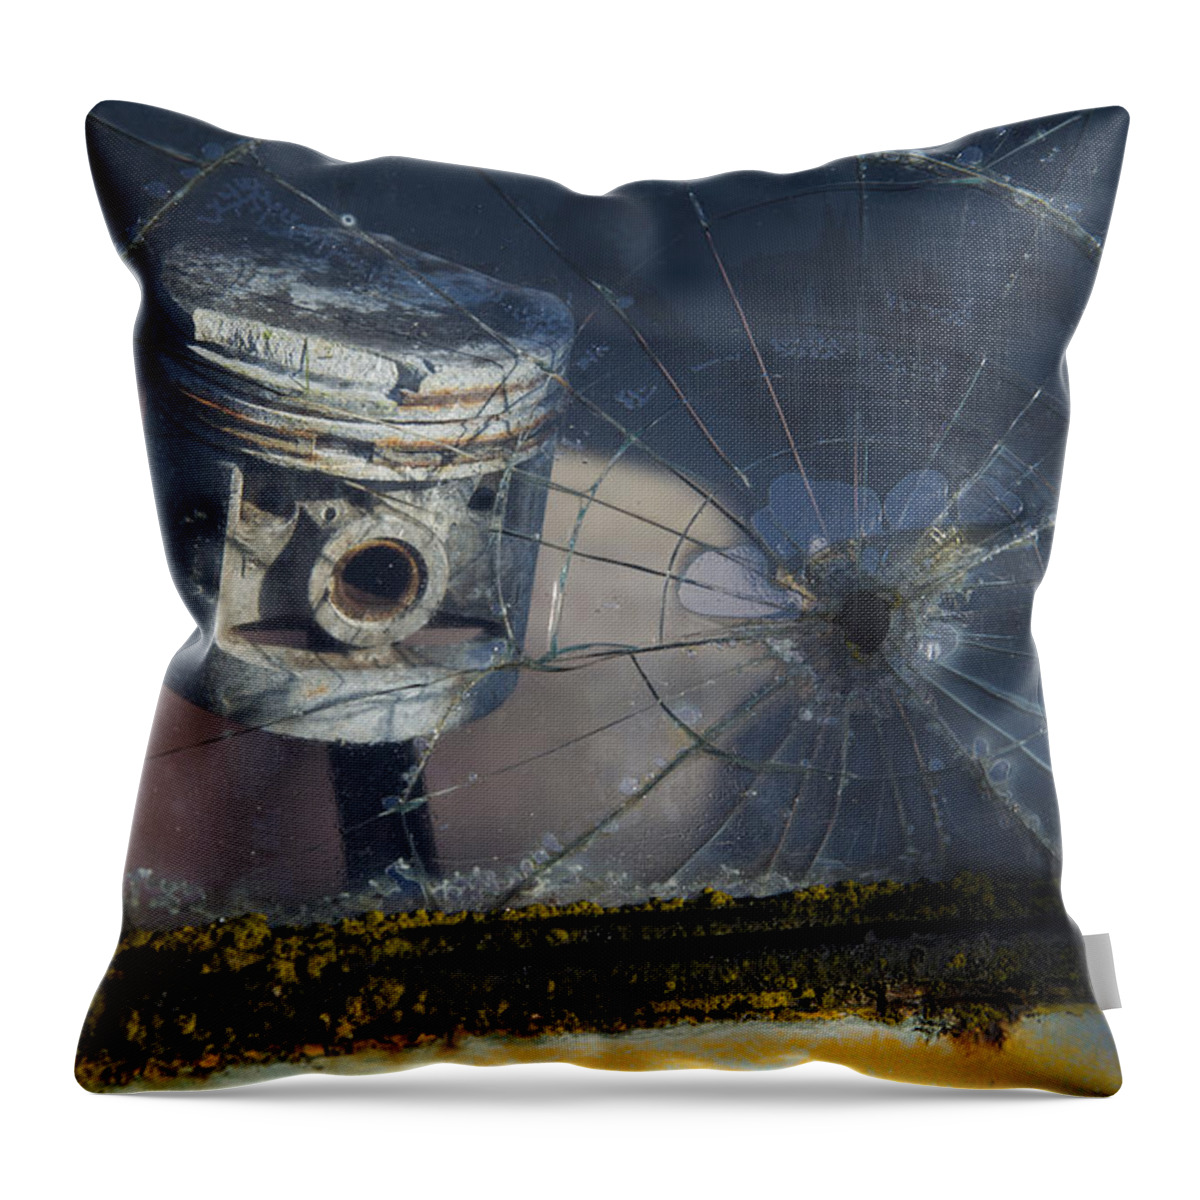 Piston Throw Pillow featuring the photograph That Was Close by Paul DeRocker